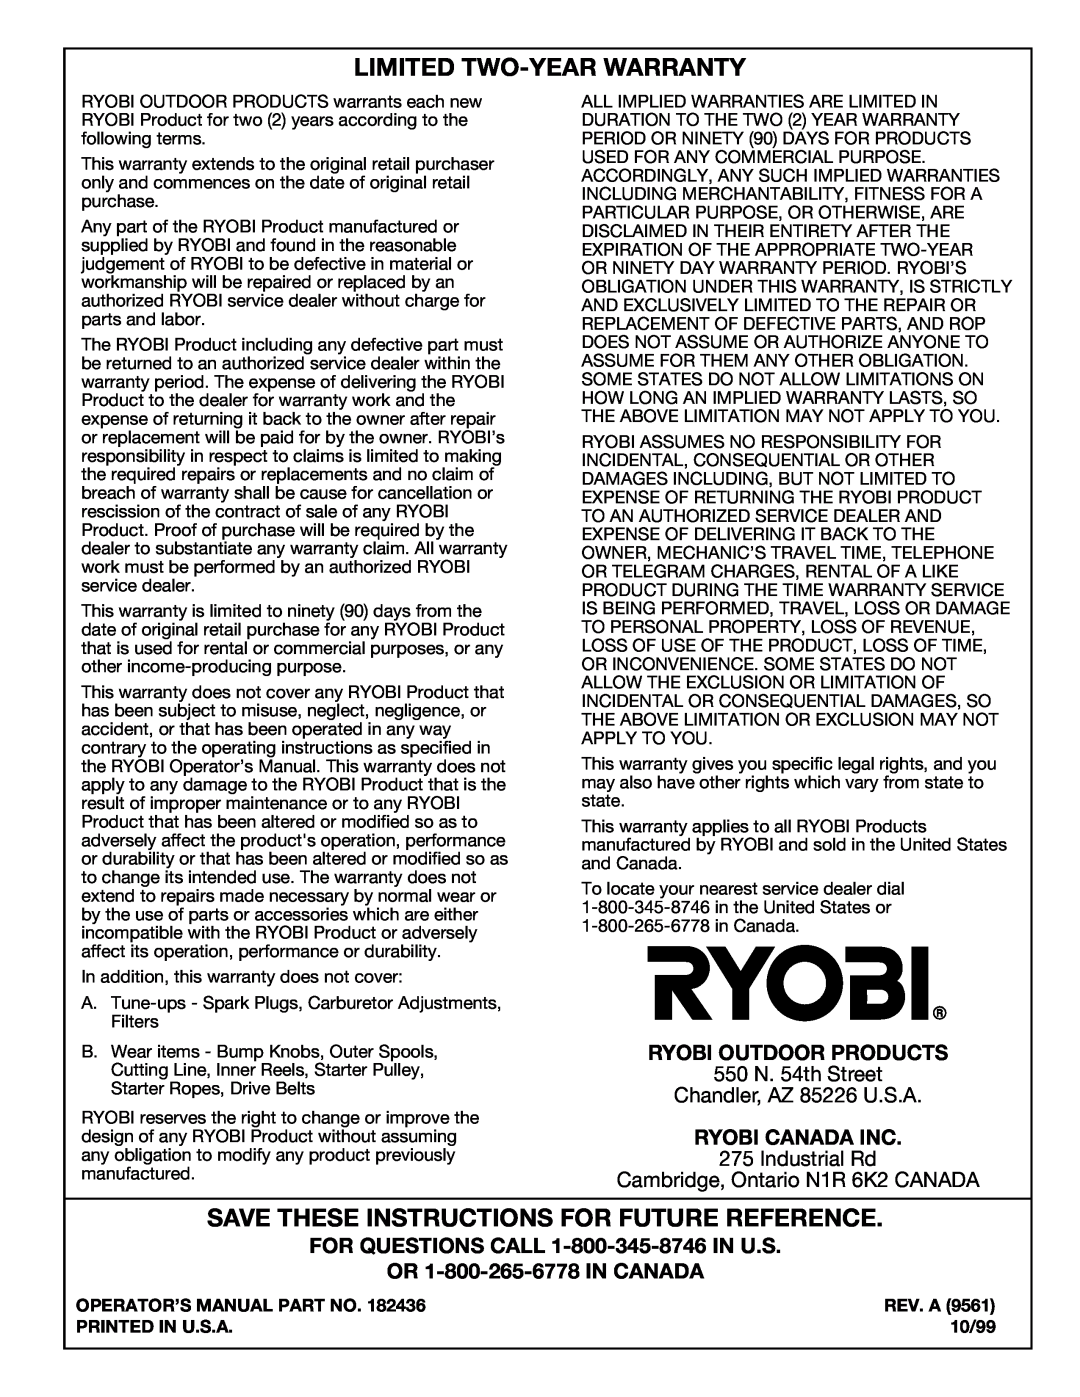 Ryobi 890r Limited Two-Year Warranty, Save These Instructions For Future Reference, Ryobi Outdoor Products, Rev. A, 10/99 